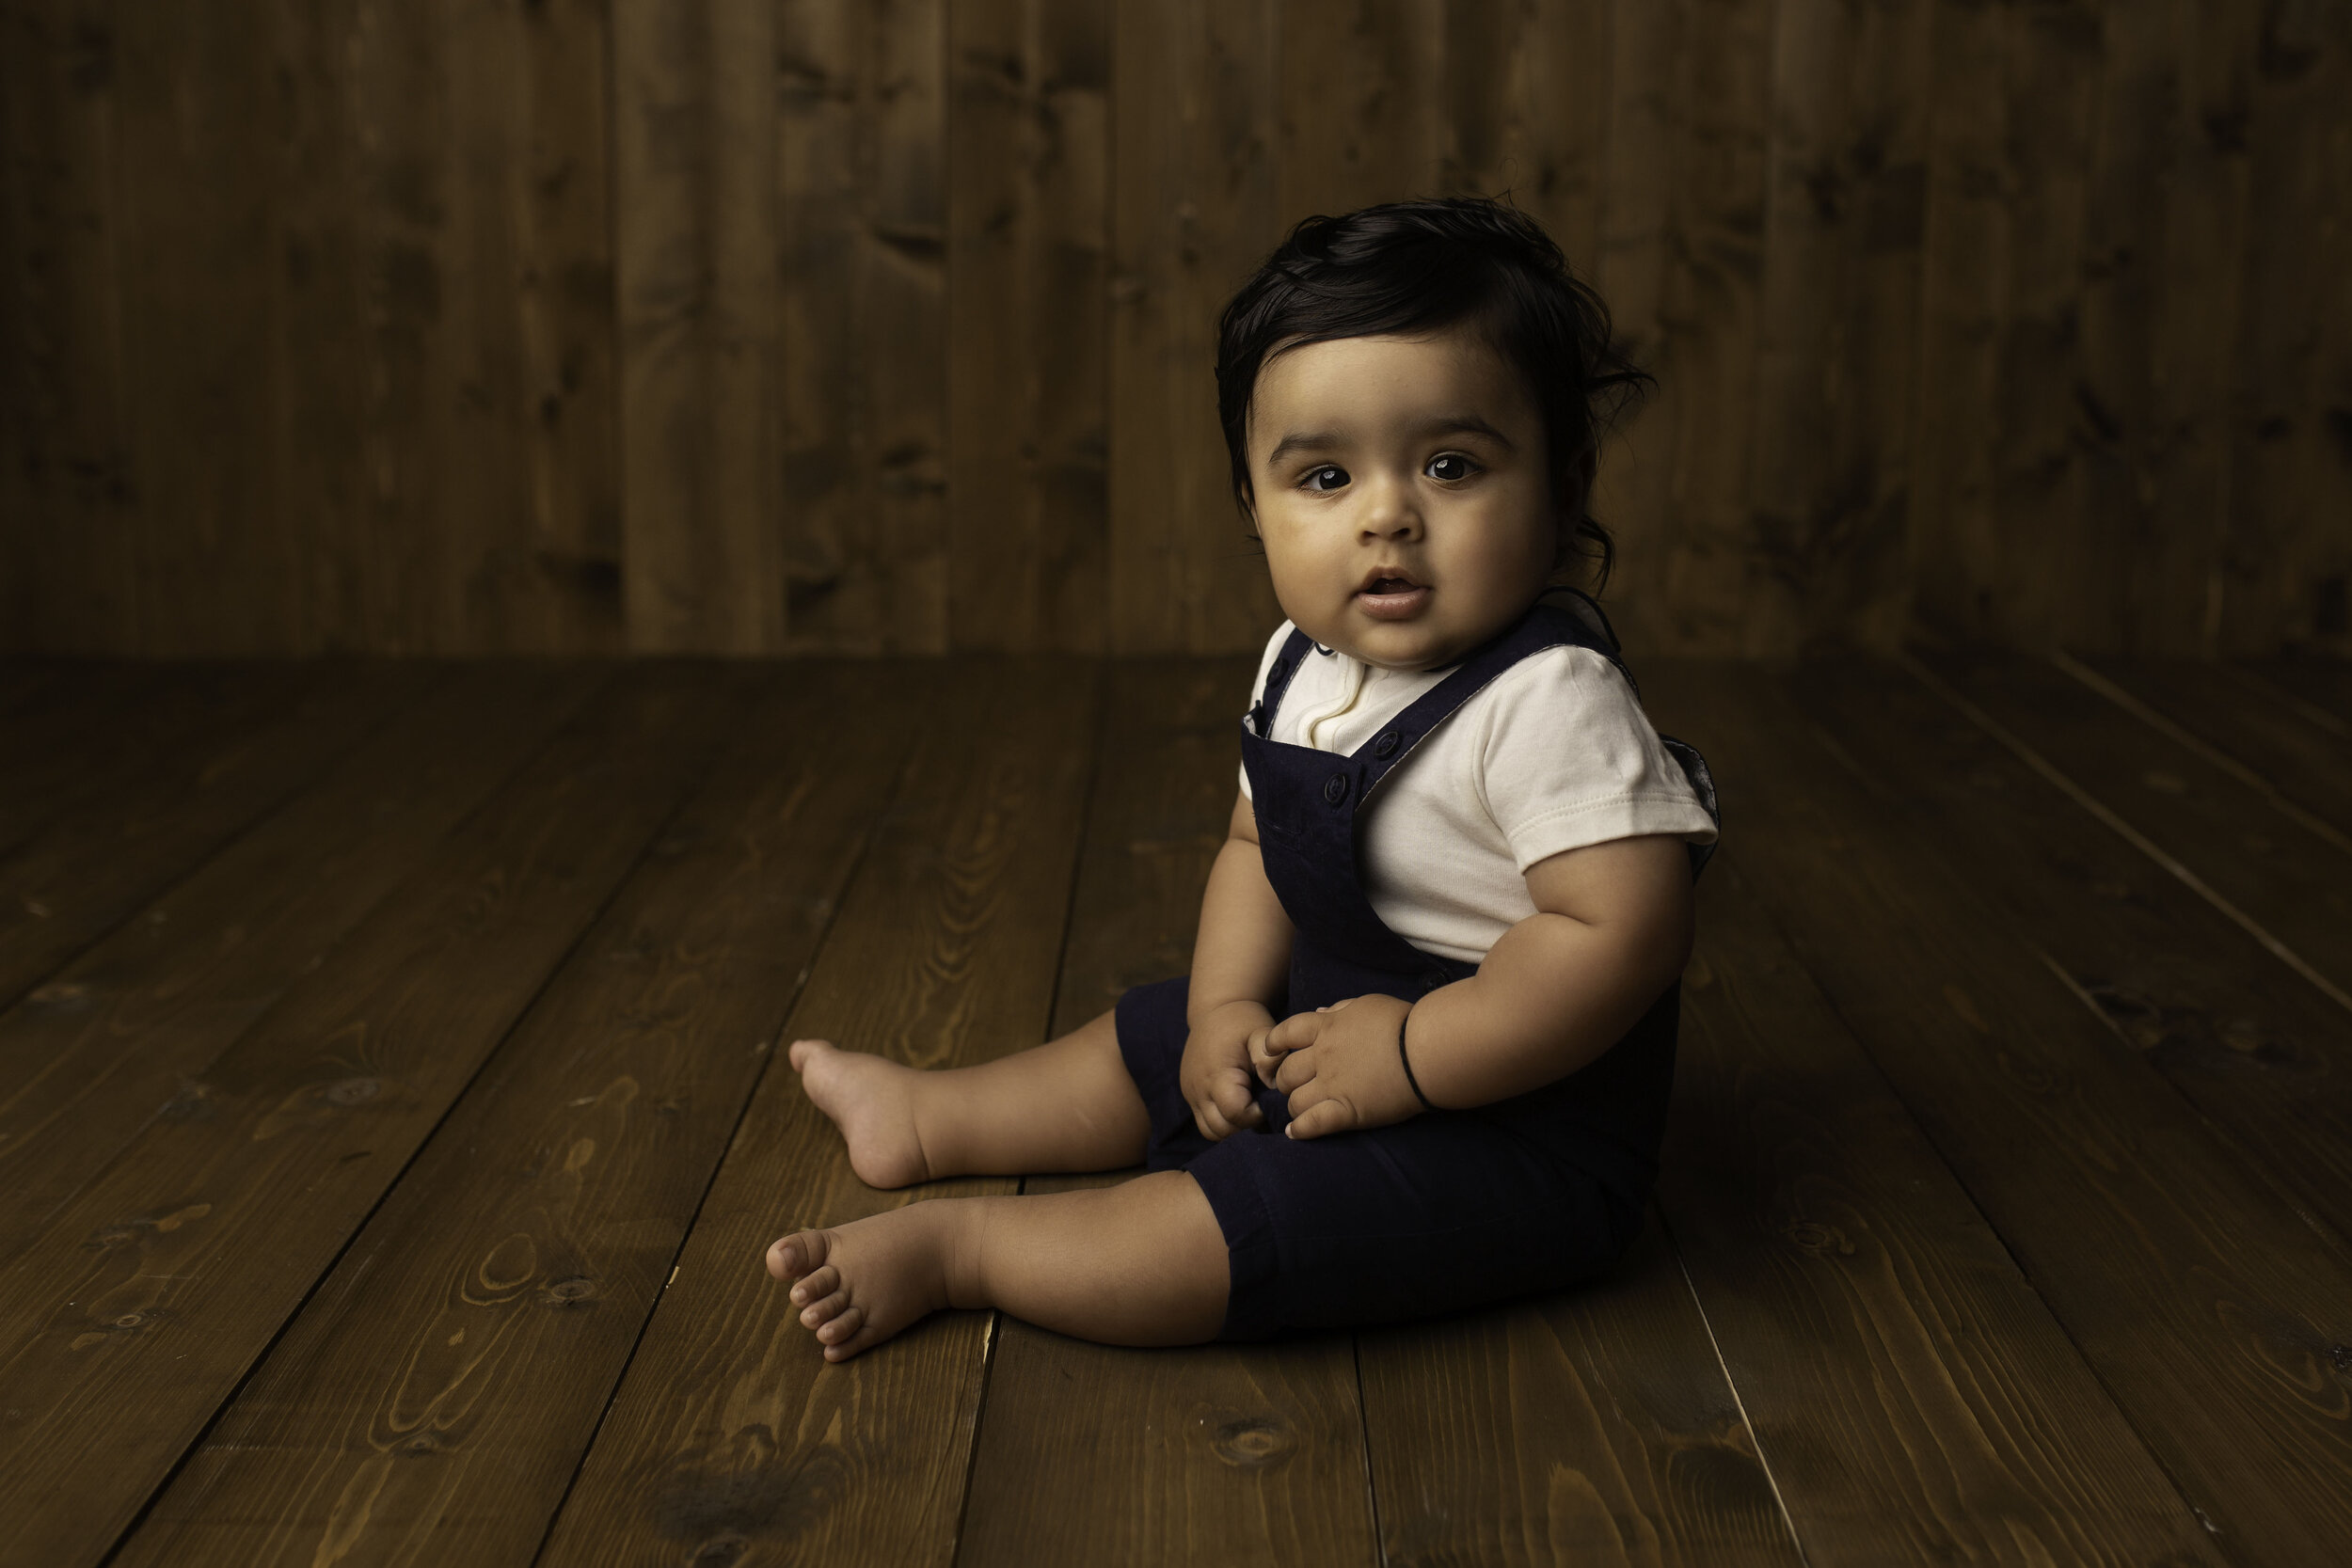 KYRAN-SITTER-SESSION-7-MONTH-OLD-CHILDRENS-PHOTOGRAPHY-LEA-COOOPER-PHOTOGRAPHY-1.jpg